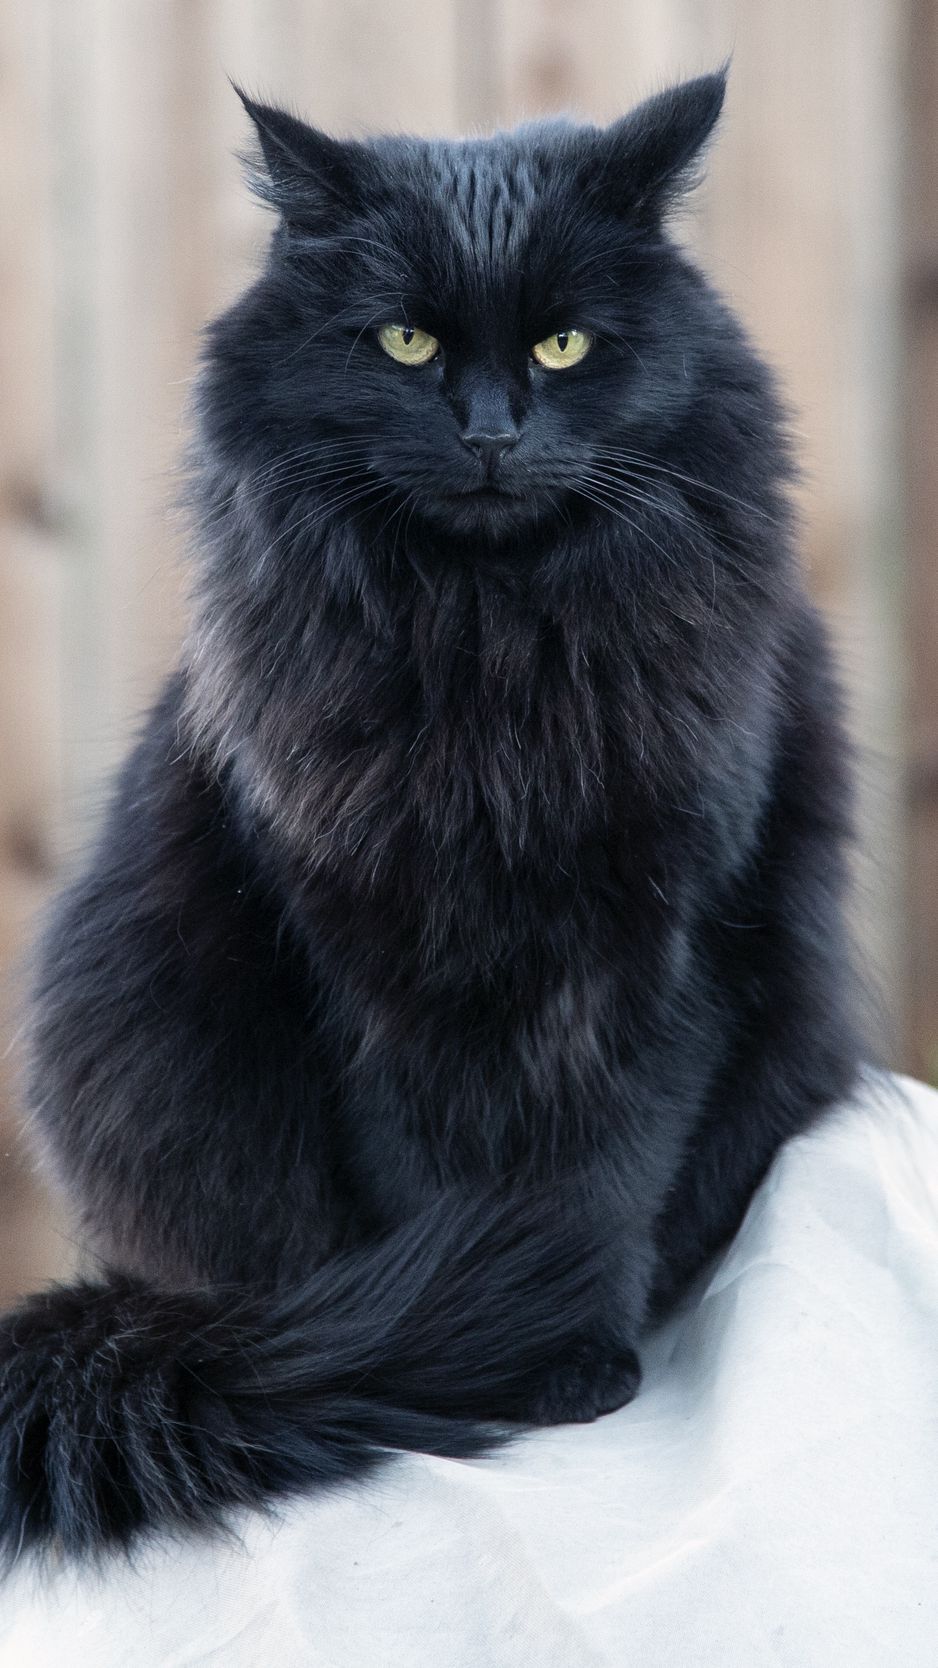 Download wallpaper 938x1668 cat, black cat, fluffy, sight, angry